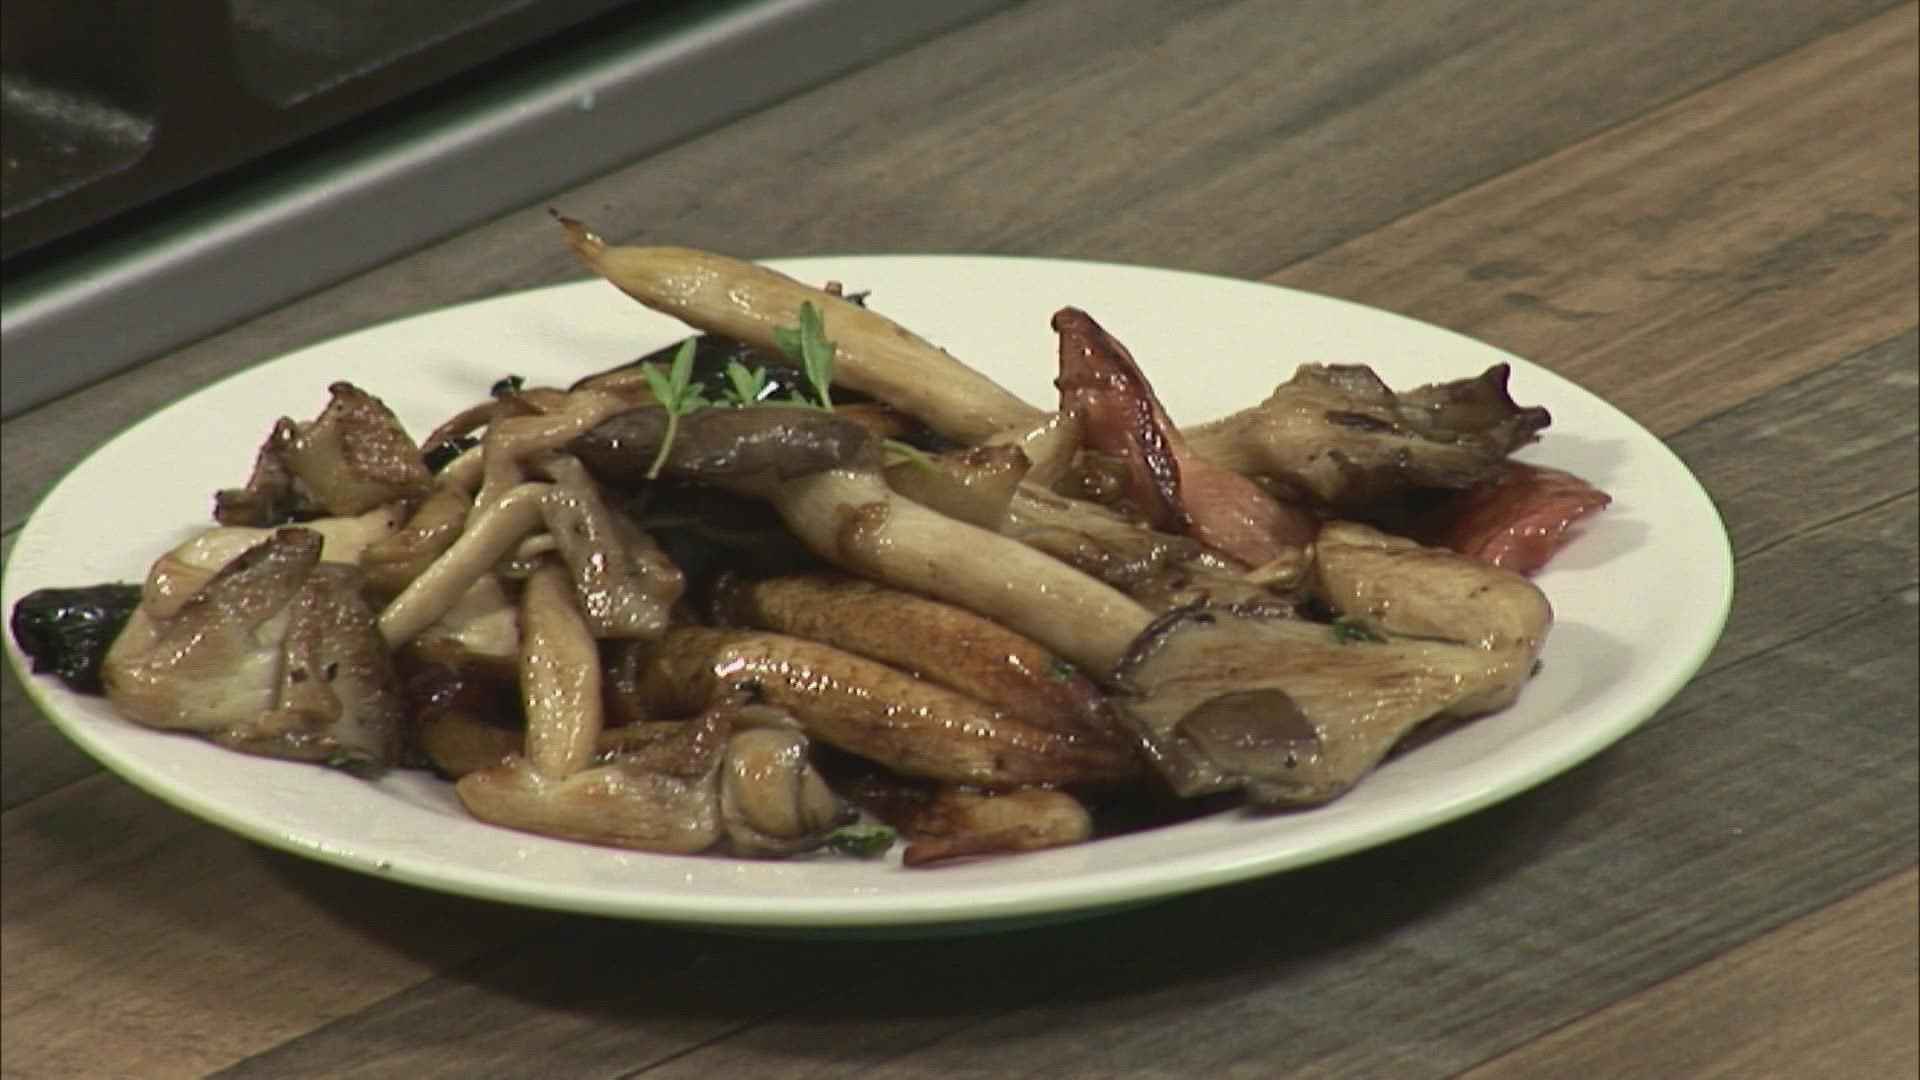 Chef Kate Shaffer shares her recipe for cooking wild mushrooms.